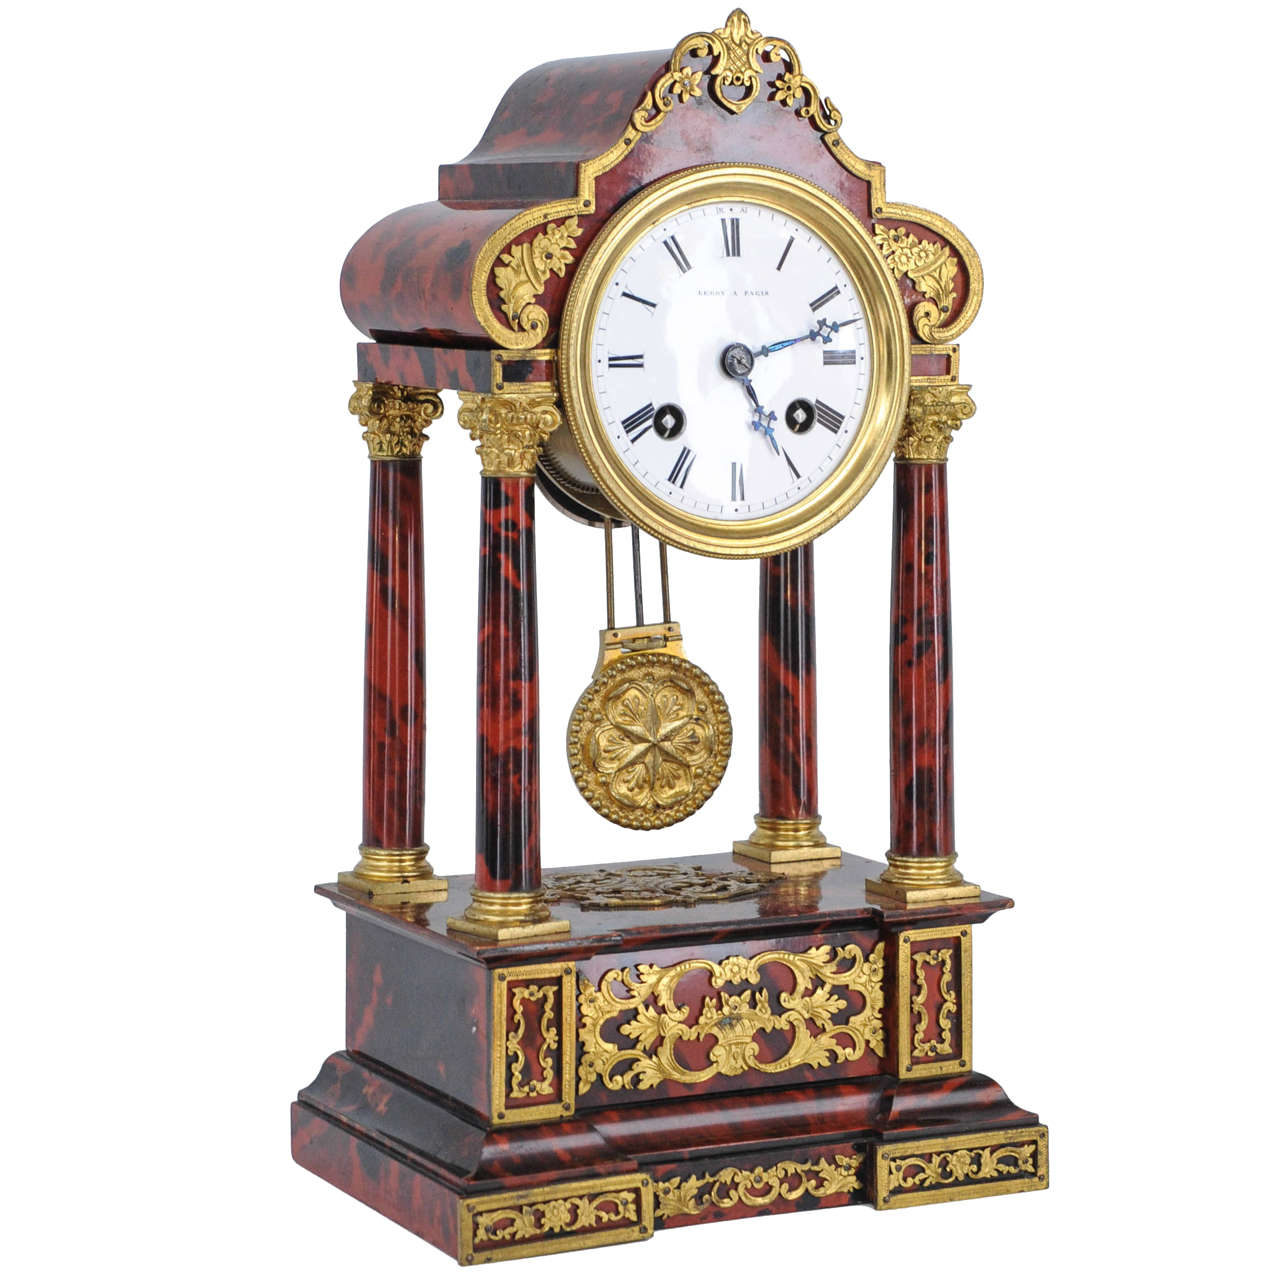 Very Attractive Small Charming Tortoiseshell clock, Signed "Leroy a Paris" For Sale